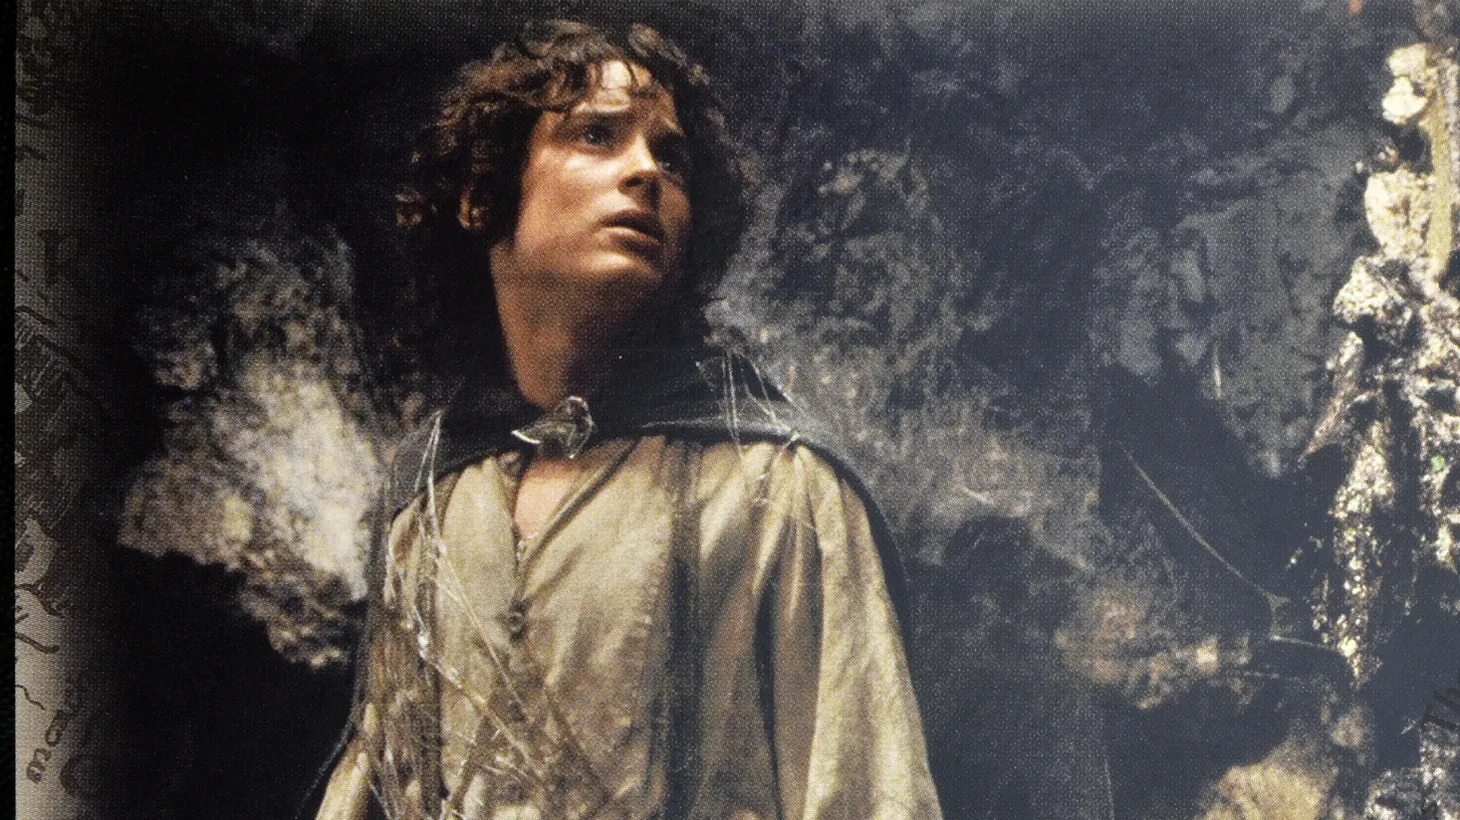 Warner Bros. announced a deal to pursue new “Lord of the Rings” films.